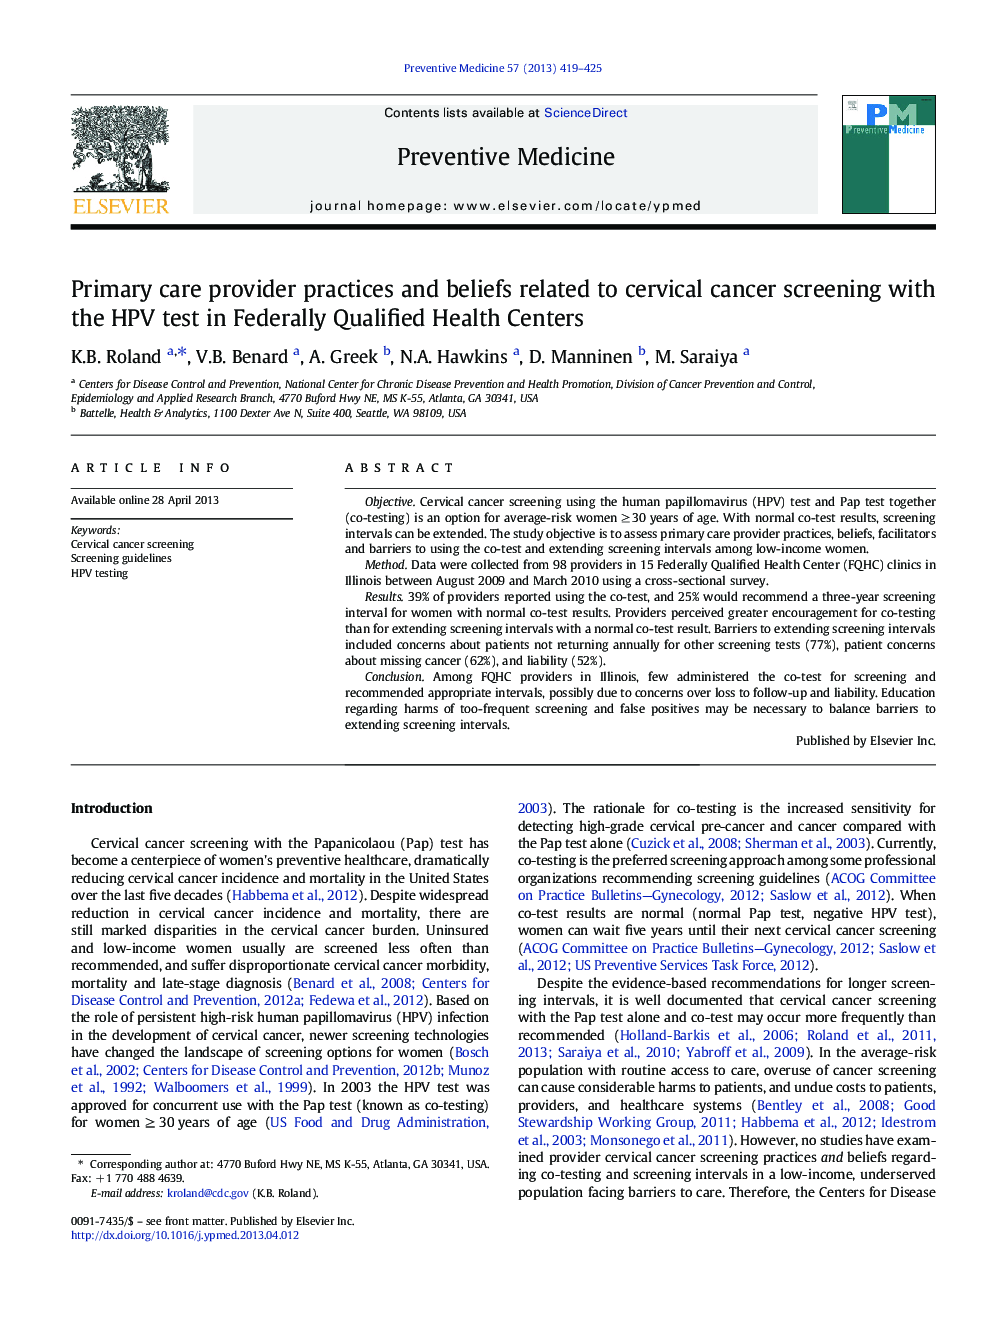 Primary care provider practices and beliefs related to cervical cancer screening with the HPV test in Federally Qualified Health Centers